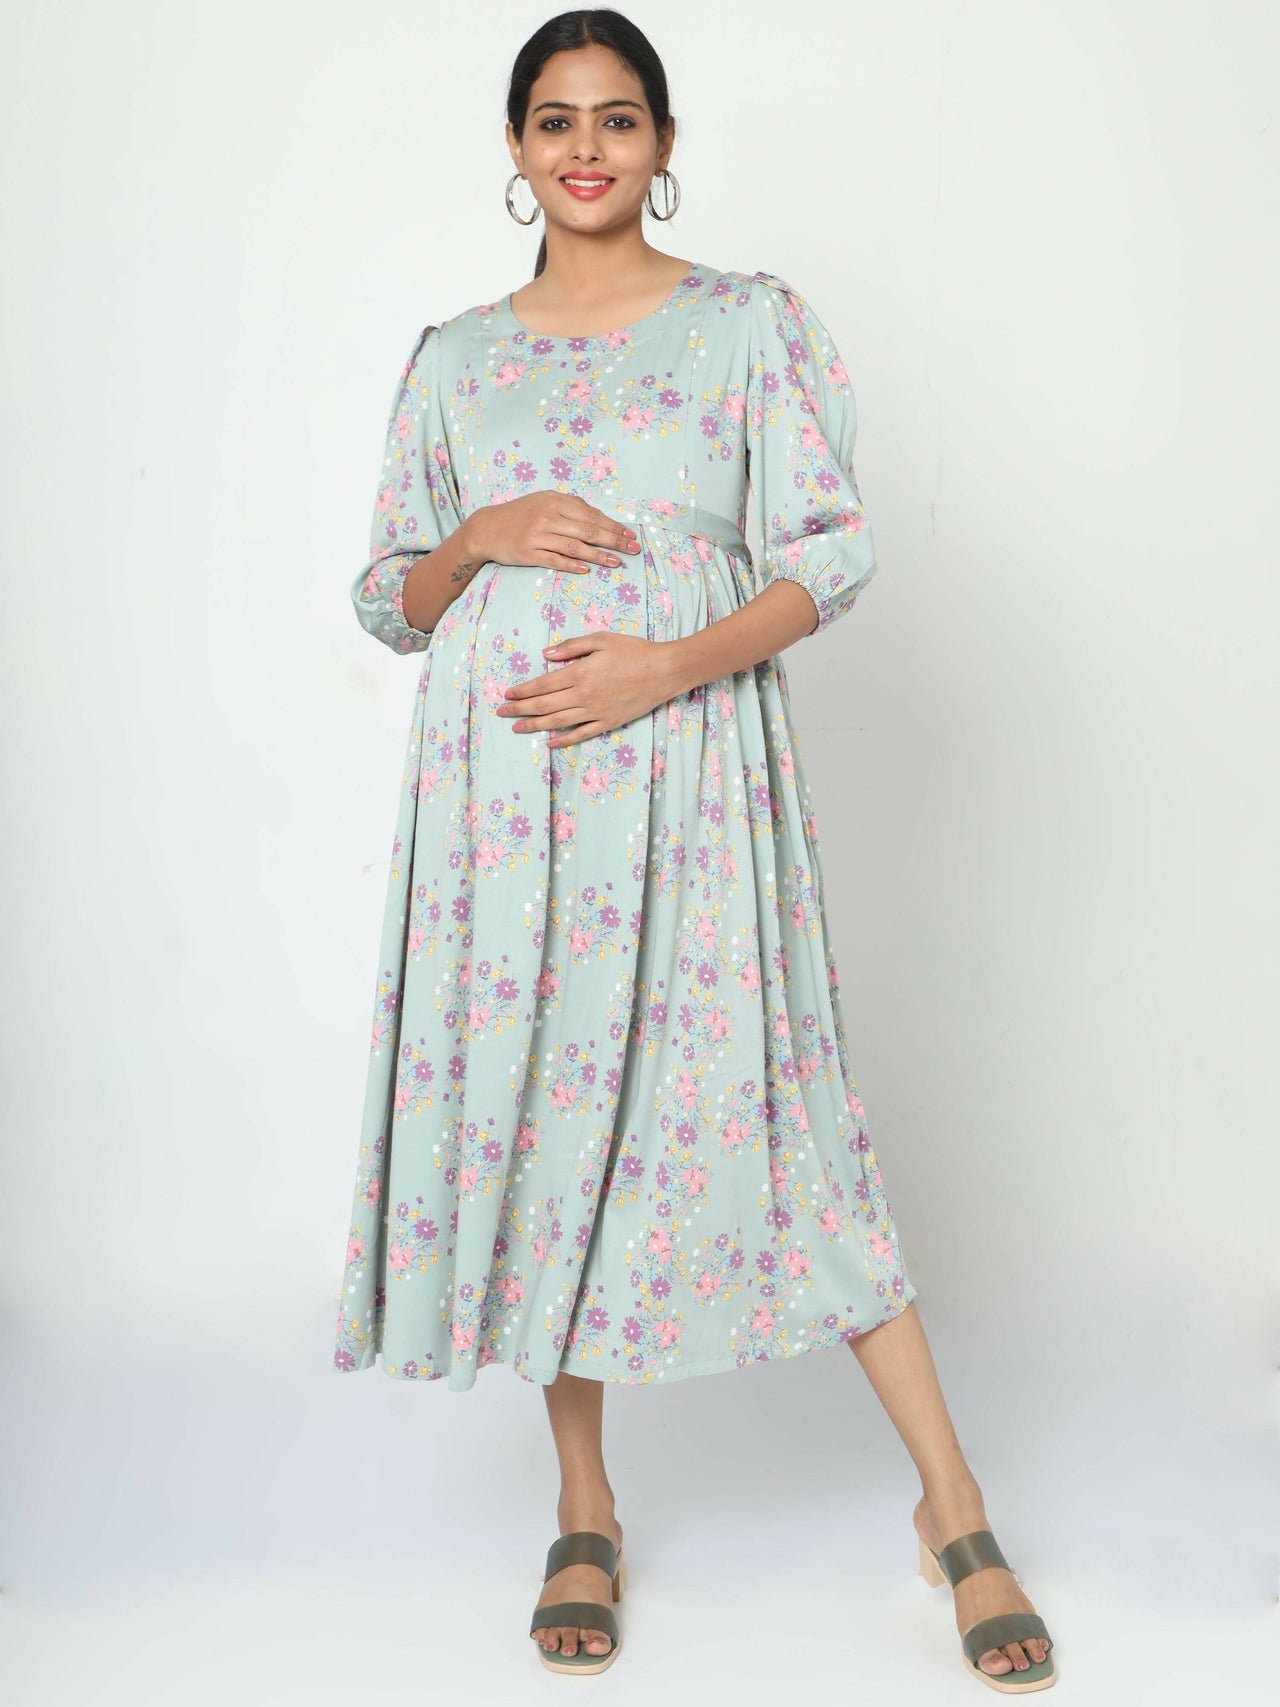 Manet Three Fourth Maternity Dress Pink Floral Print With Concealed Zipper Nursing Access - Green - Distacart